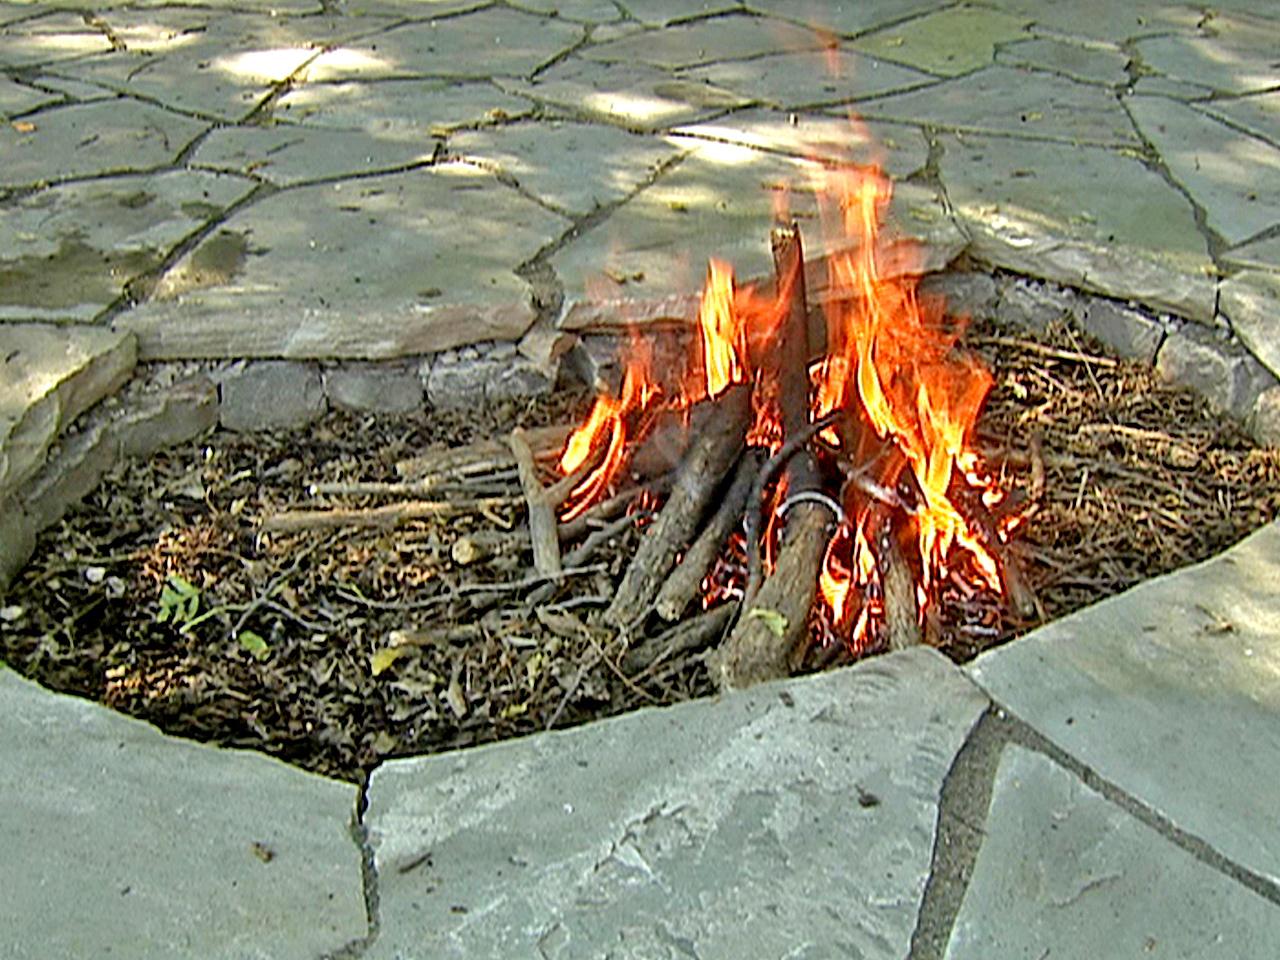 Outdoor Fire Pits And Pit Safety, Best Firewood To Burn In Fire Pit